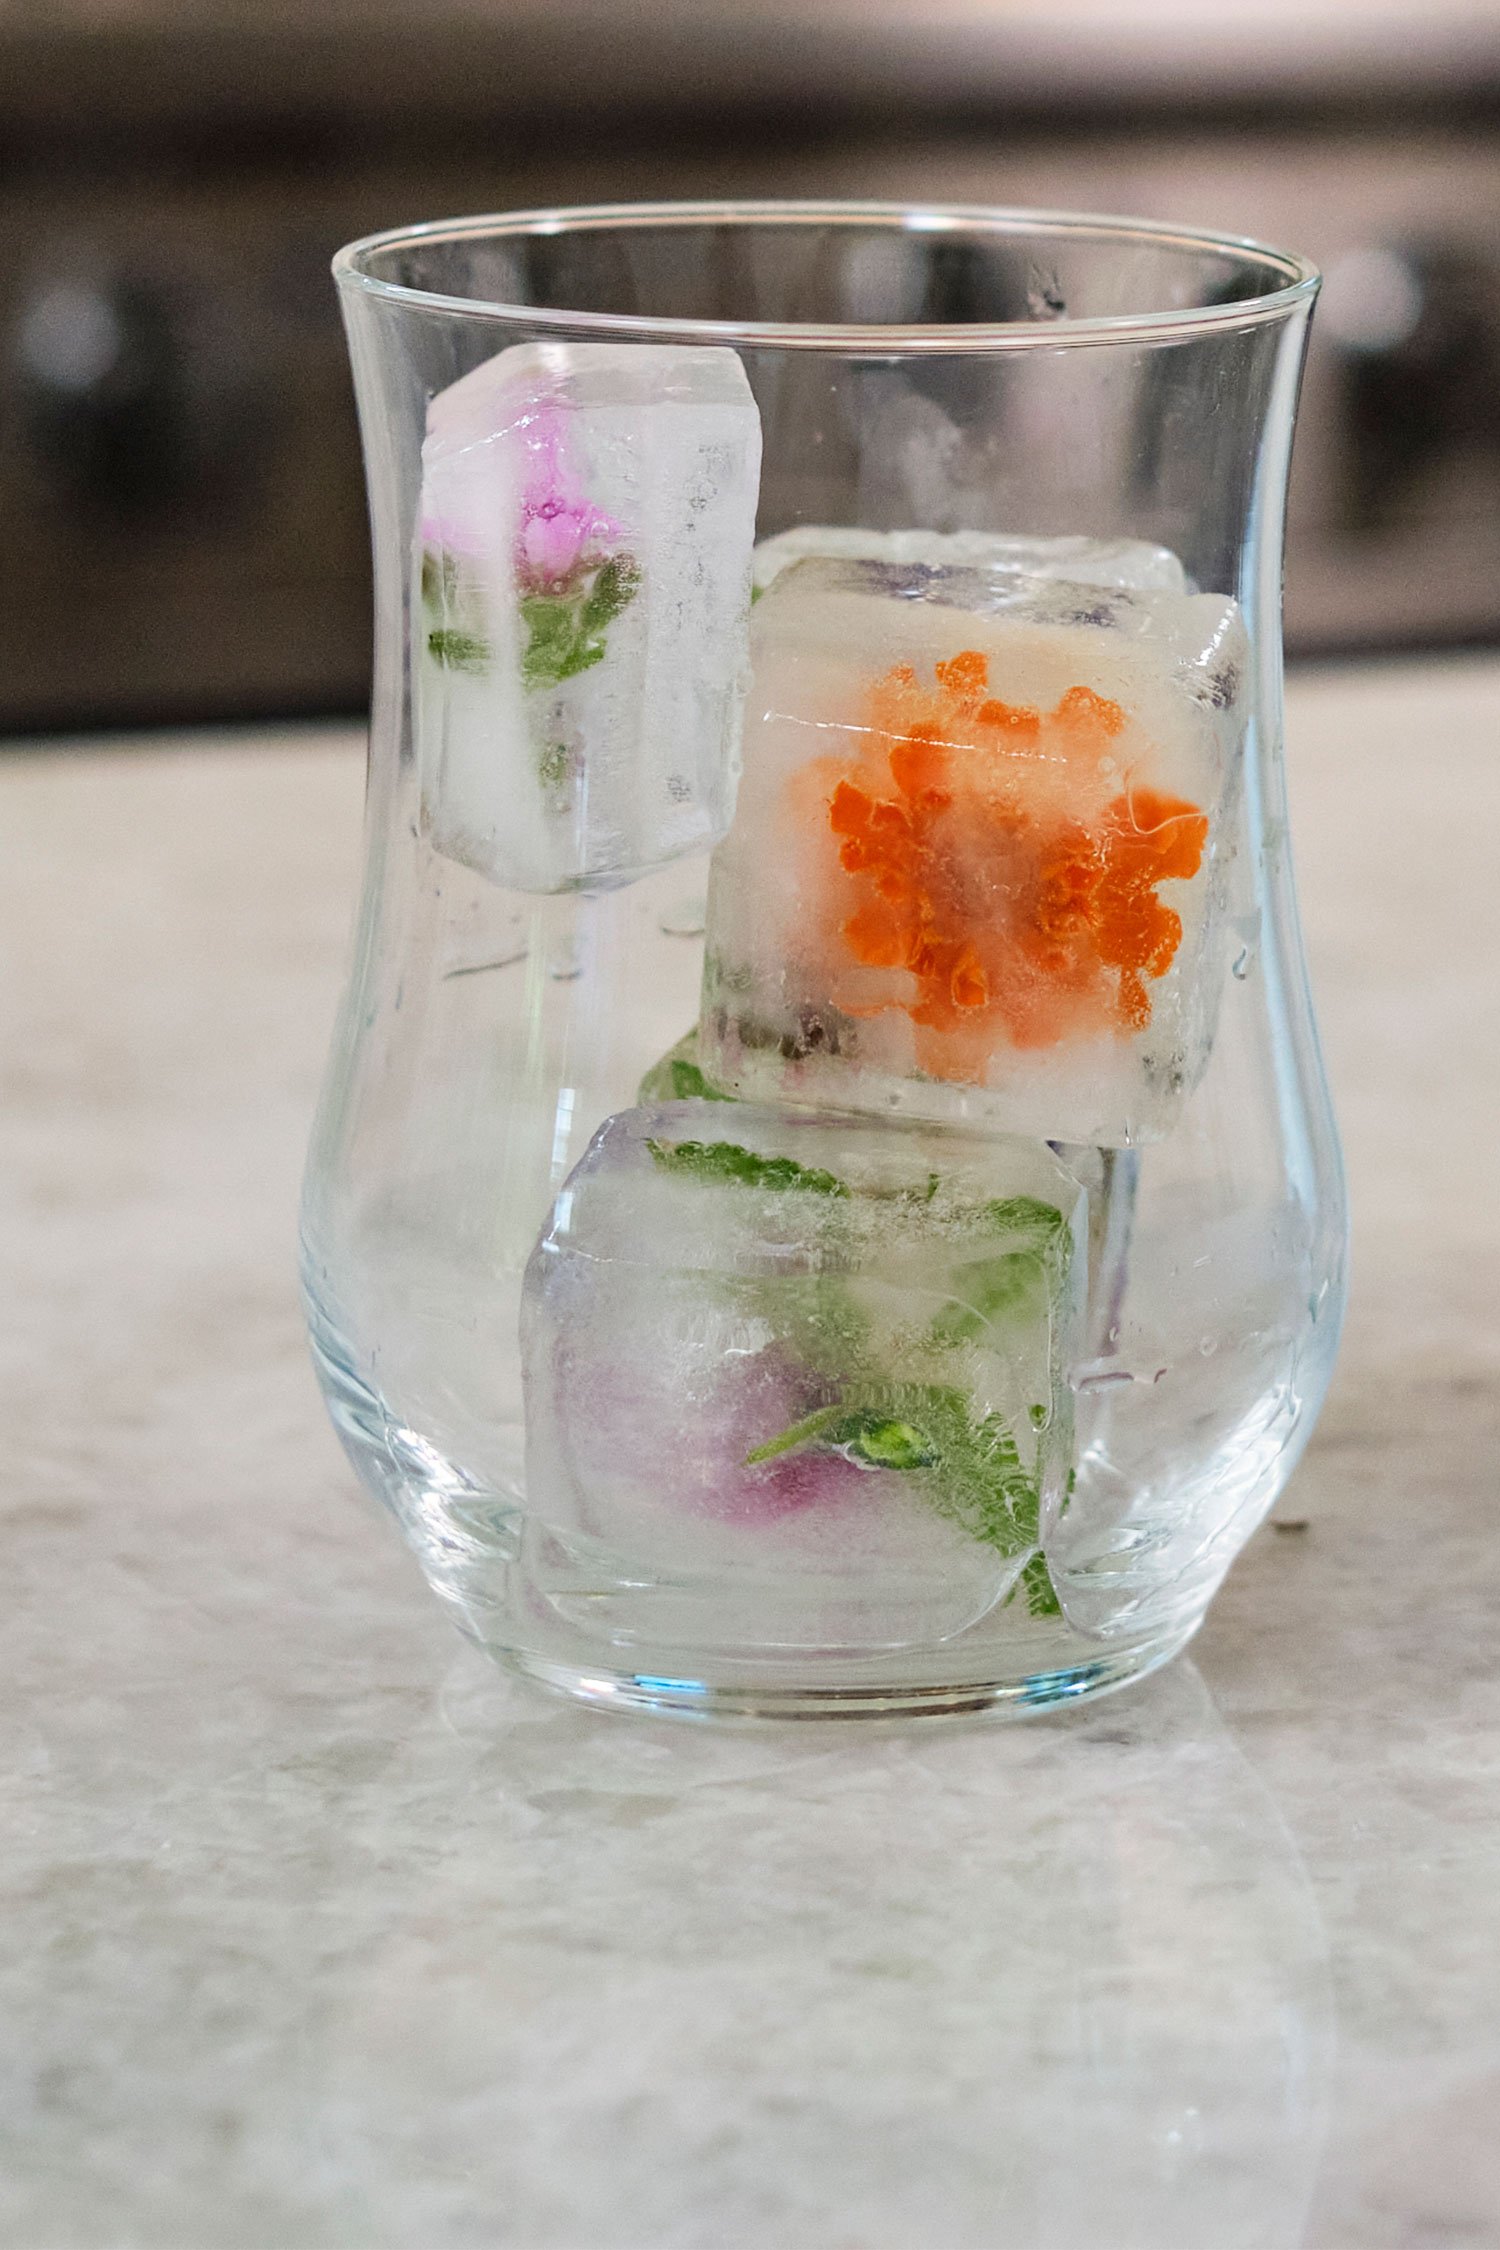 Here's a fun Recipe in Bloom- Flower Filled Ice Cubes!